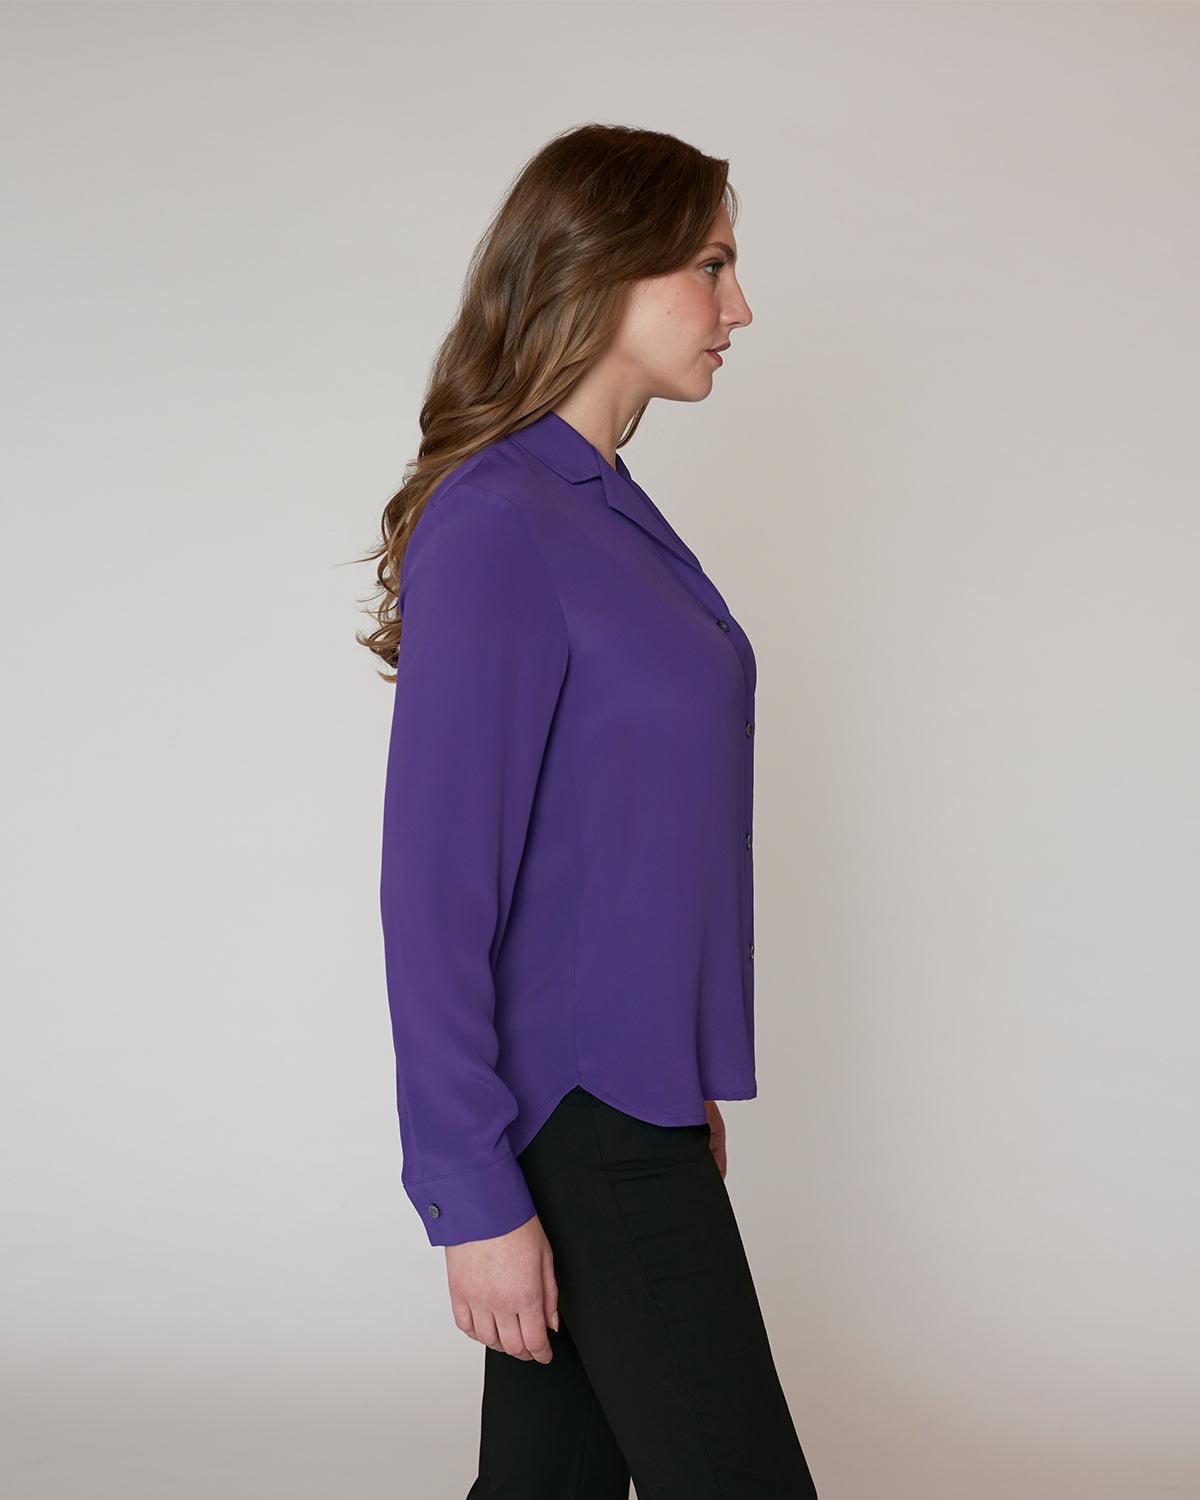 "#color_AMETHYST| Siobhan is 5'8.5", wearing a size S